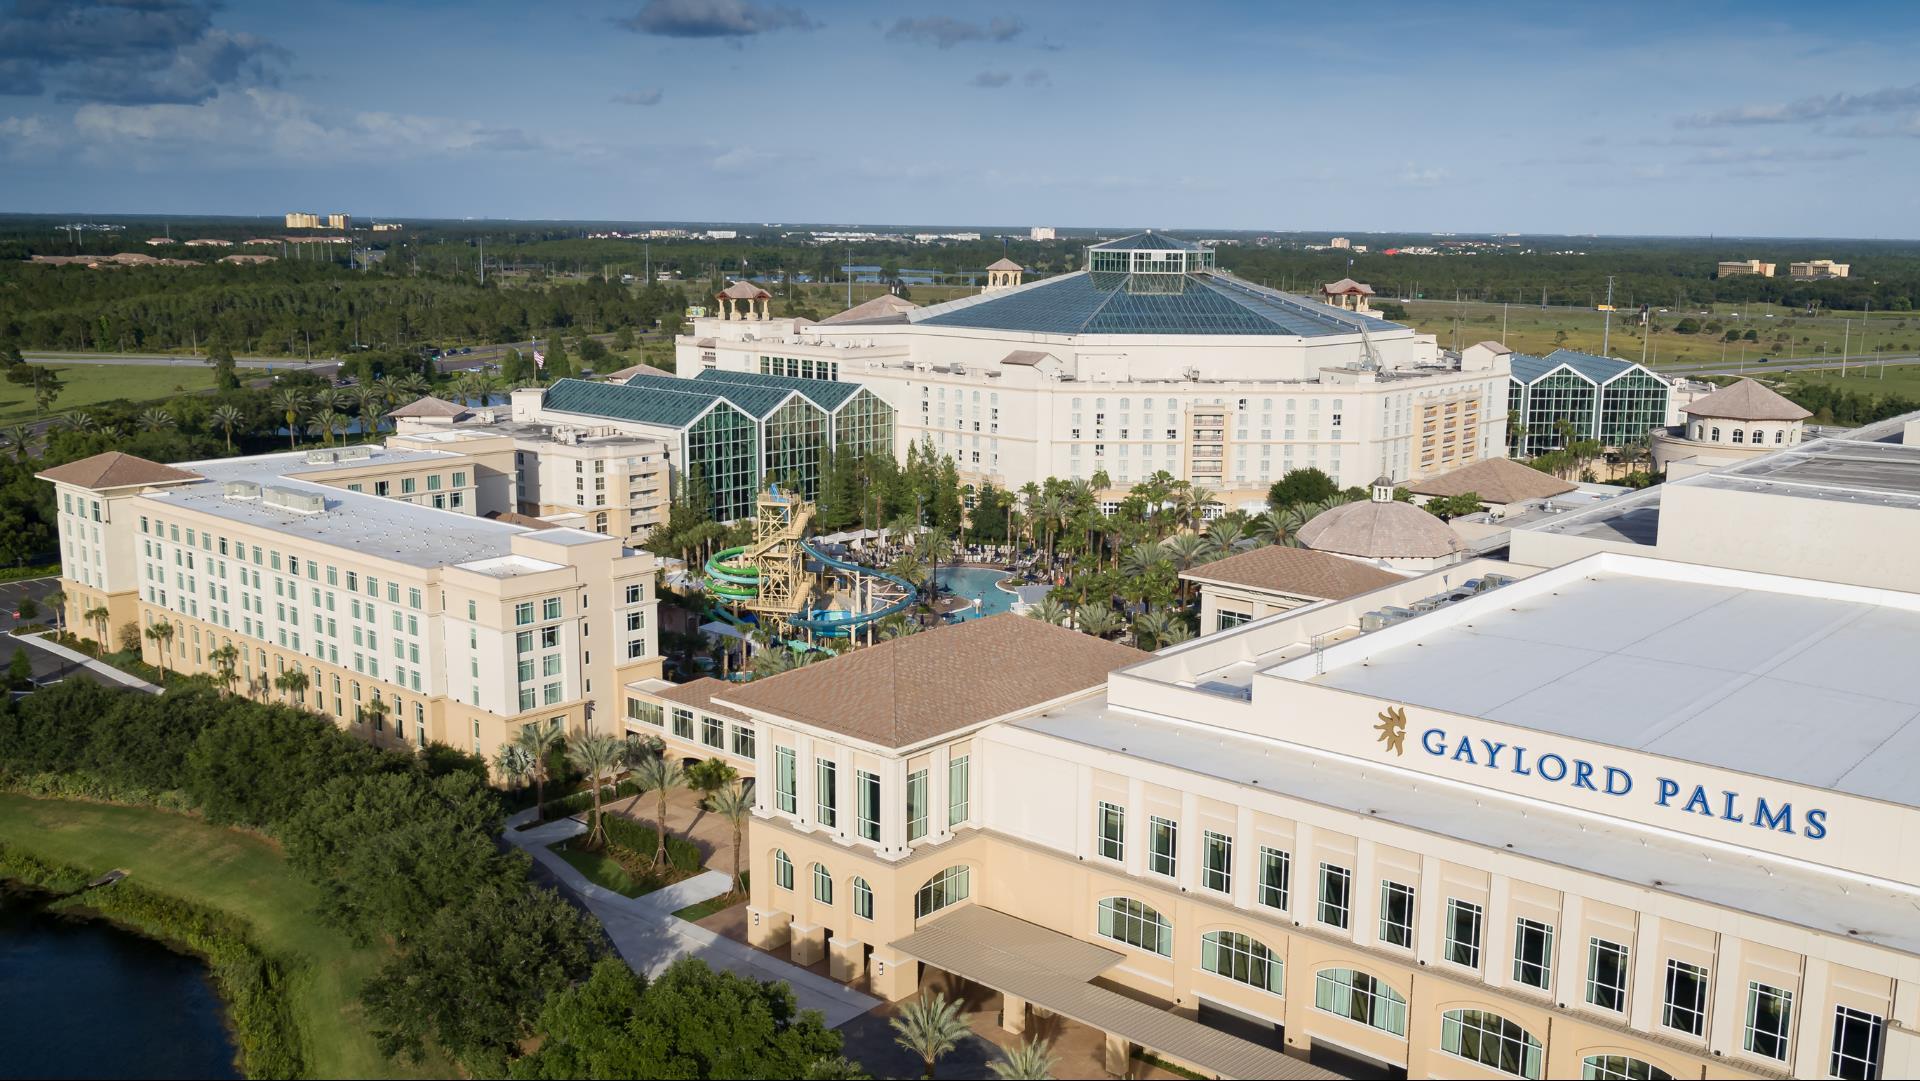 Gaylord Palms Resort & Convention Center in Kissimmee, FL